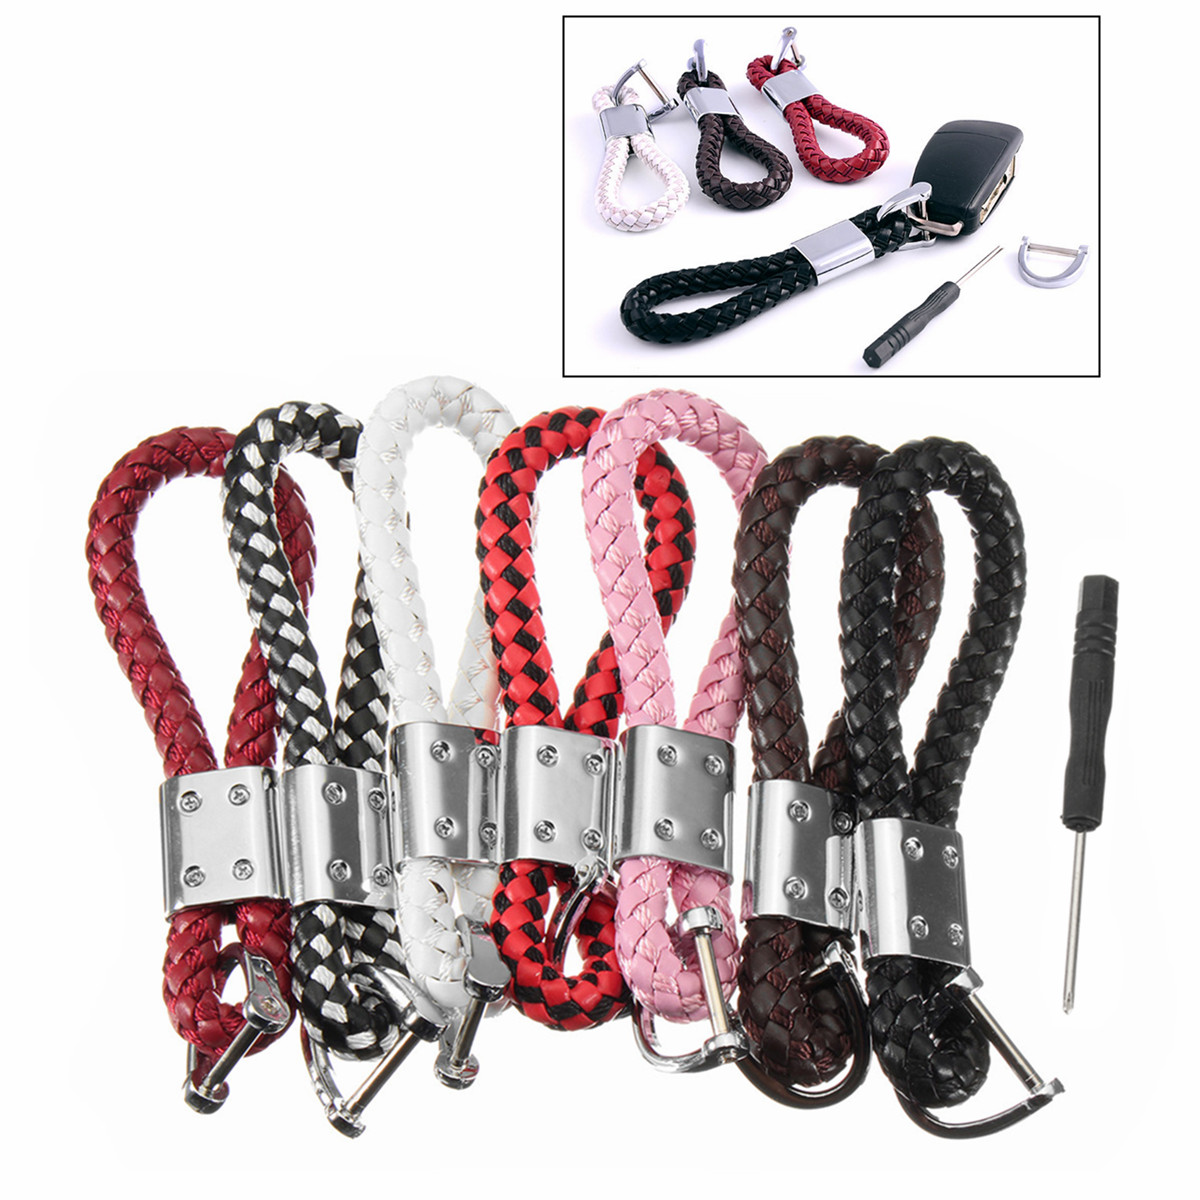 PU-Leather-Braided-Strap-Key-Chain-Stainless-Key-ring-7-Different-Colors-1191604-6